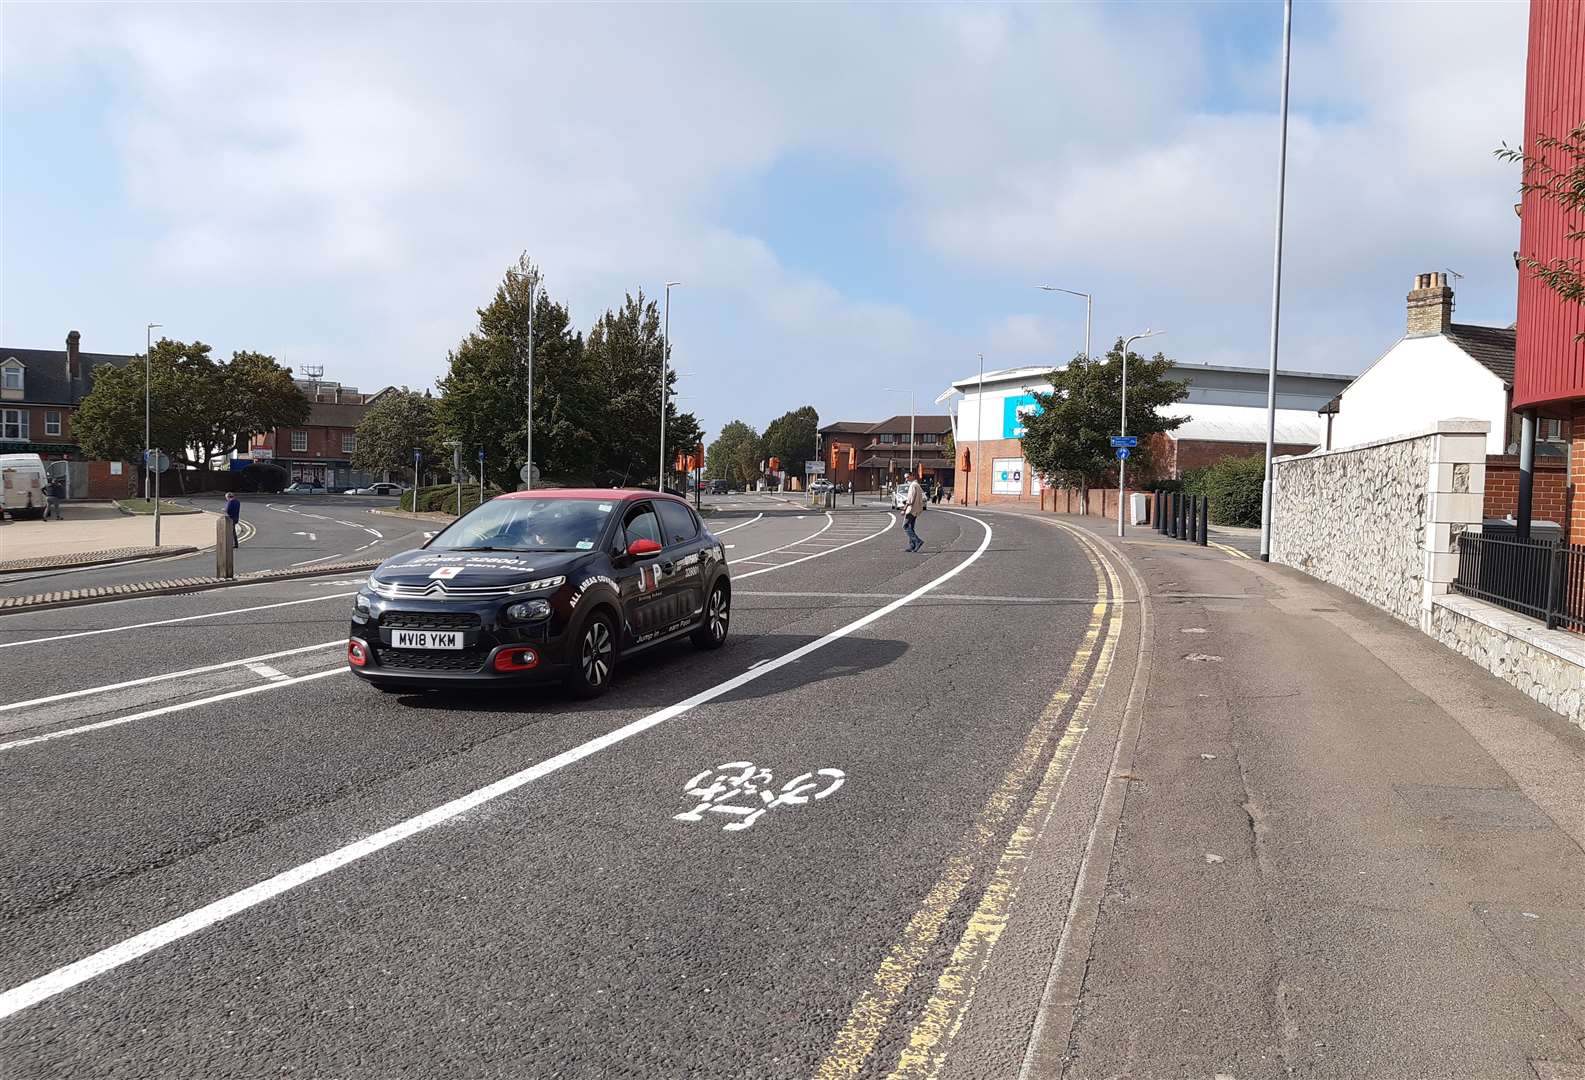 Bollards have now been removed and all lanes are open again, but bicycle road markings still remain